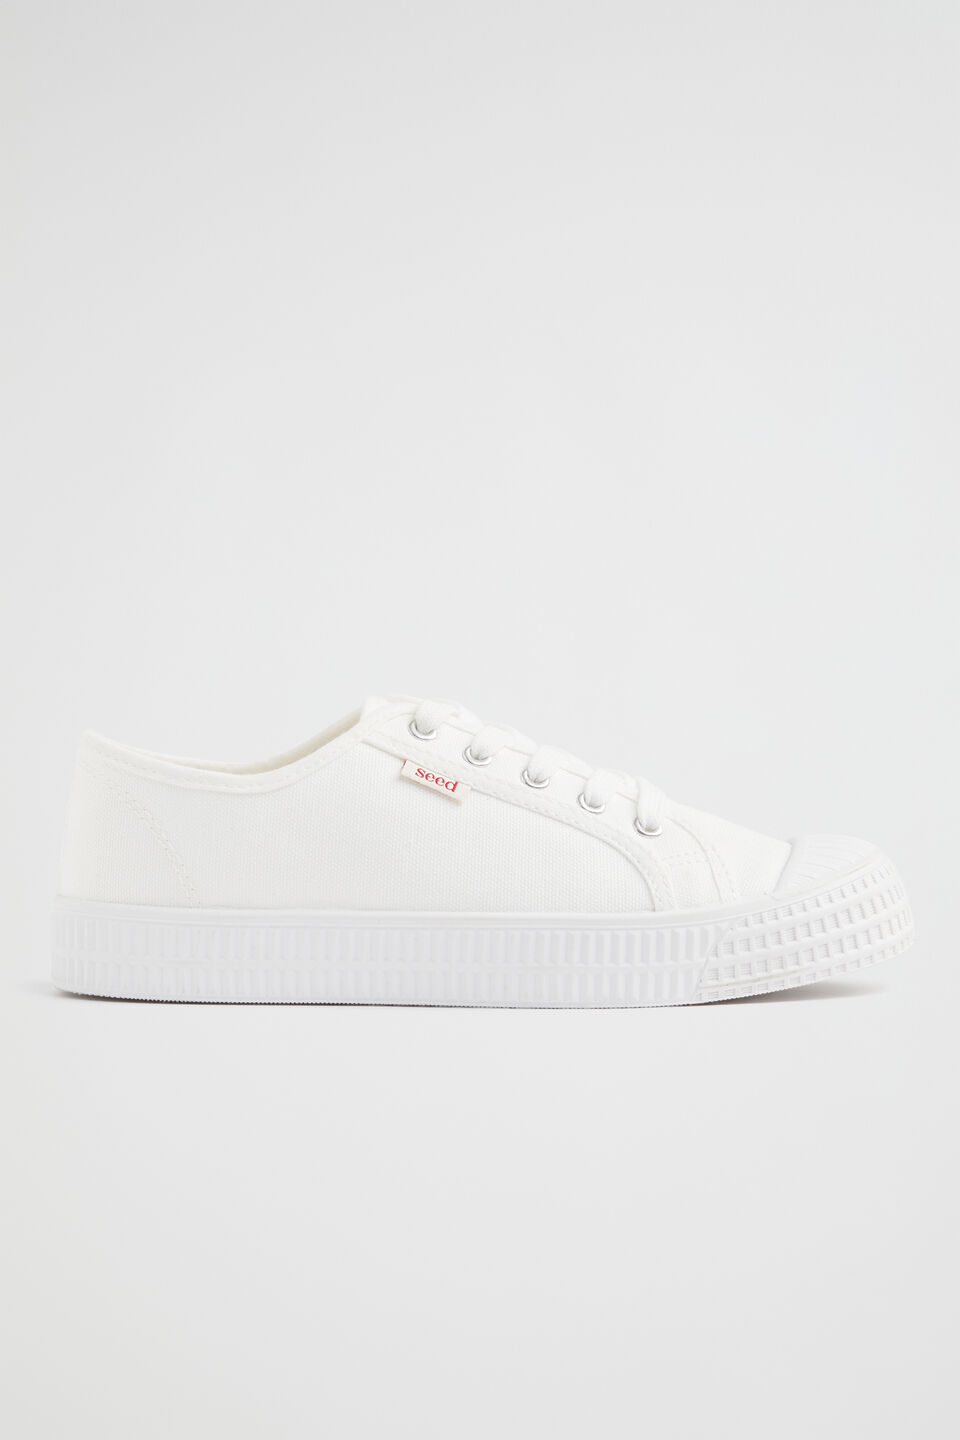 Basic Canvas Lace Up Sneaker  White